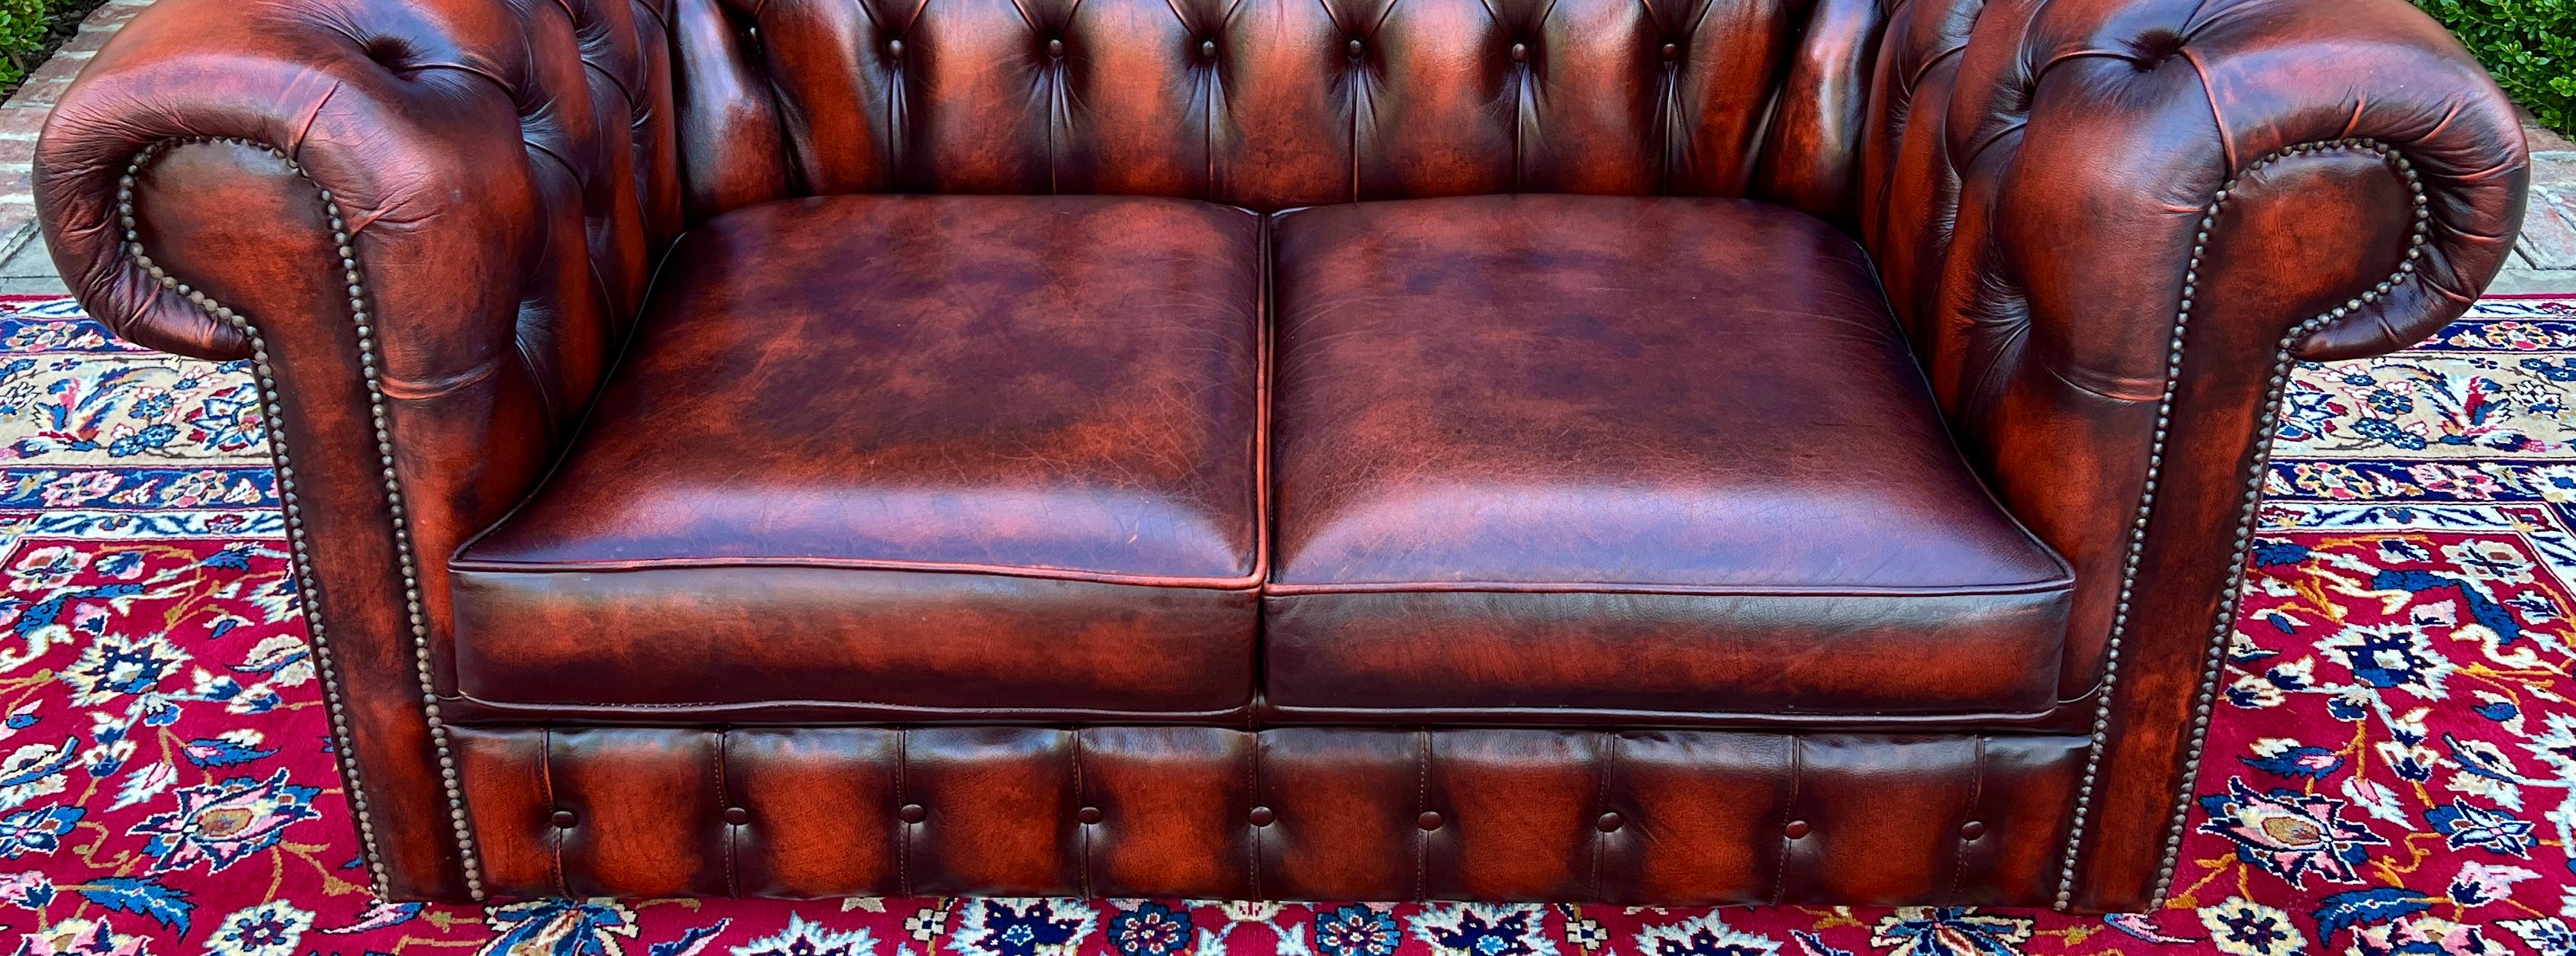 Vintage English Chesterfield Leather Tufted Love Seat Sofa Oxblood Red #2 14